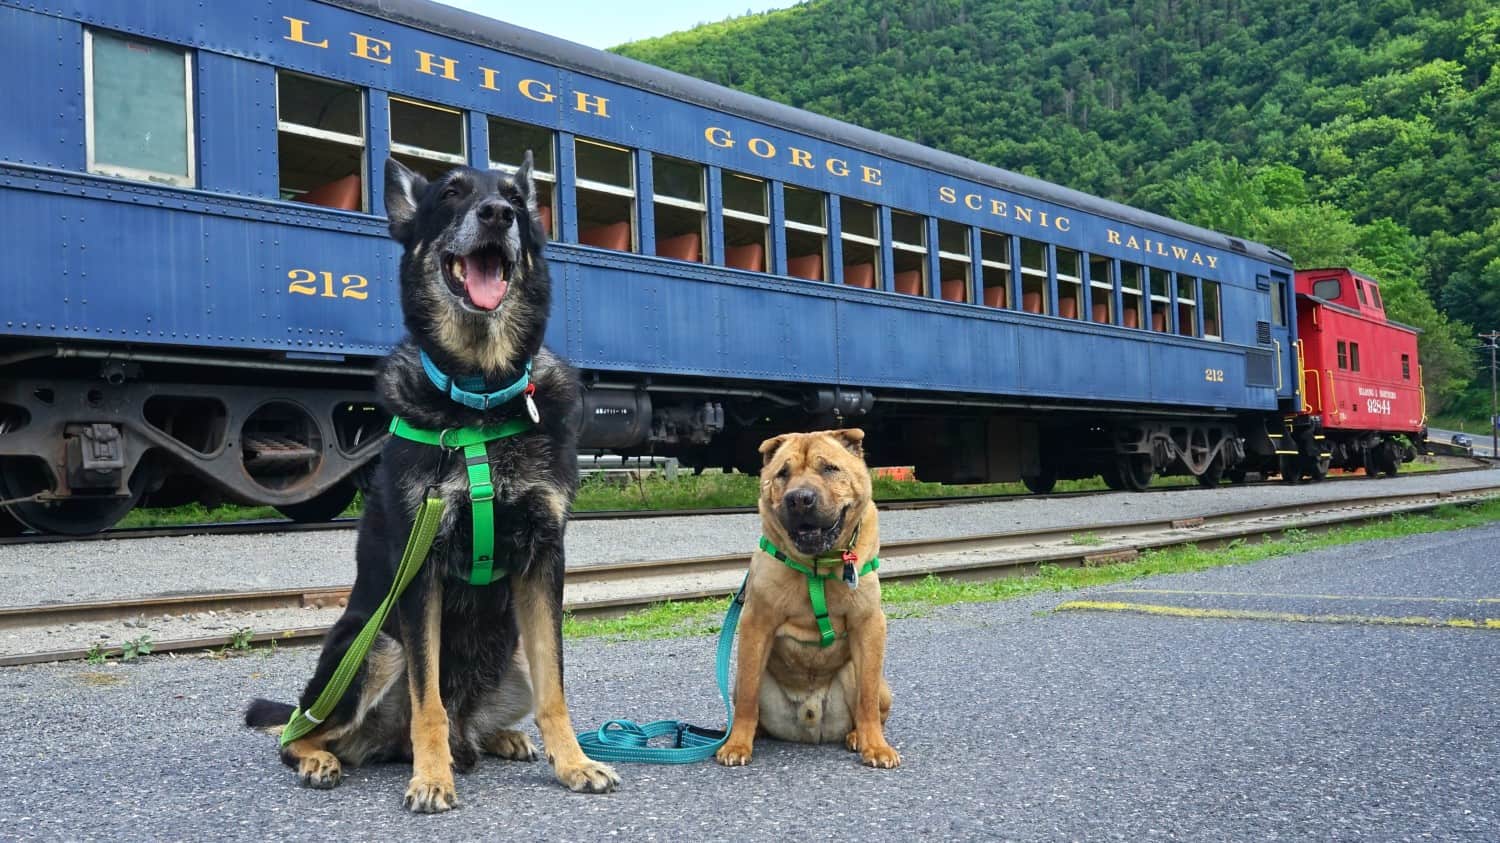 The best pet attraction in Pennsylvania: the scenic Lehigh Gorge Railroad | GoPetFriendly.com